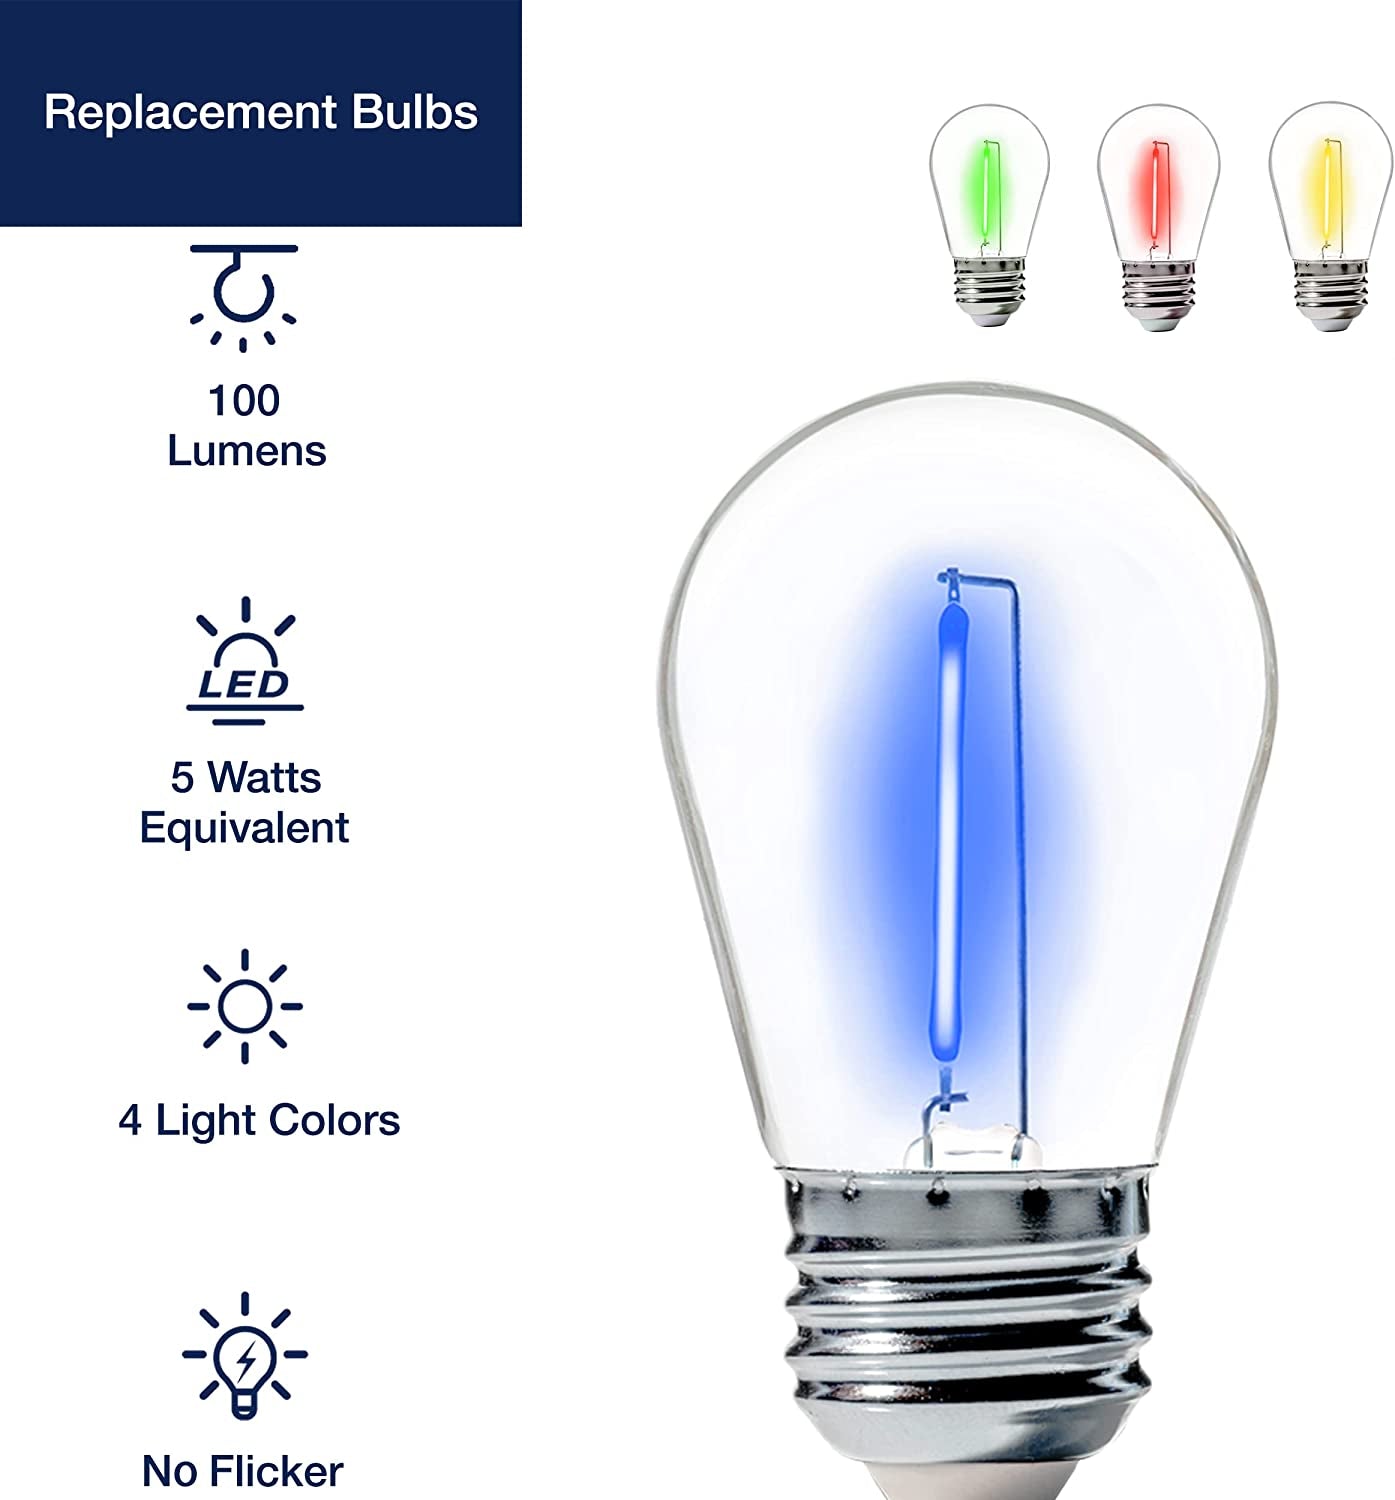 24-Pack S14 Colored LED String Light Bulbs, 1W Waterproof Outdoor Indoor Replacement Bulbs, E26 Base, CRI80, Red/Green/Blue/Warm White